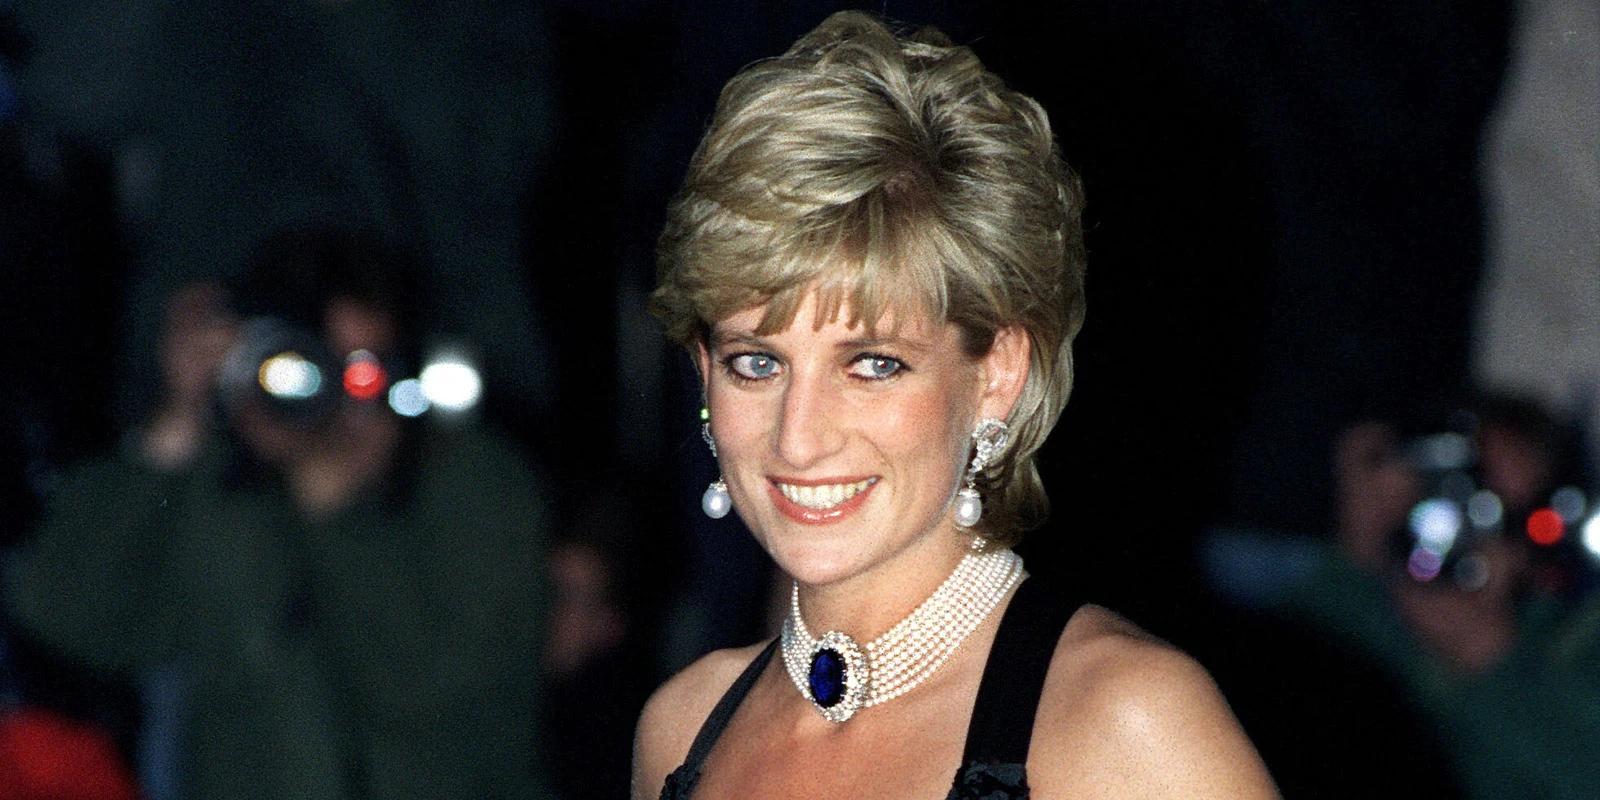 It's been 26 years since Princess Diana wore this outfit